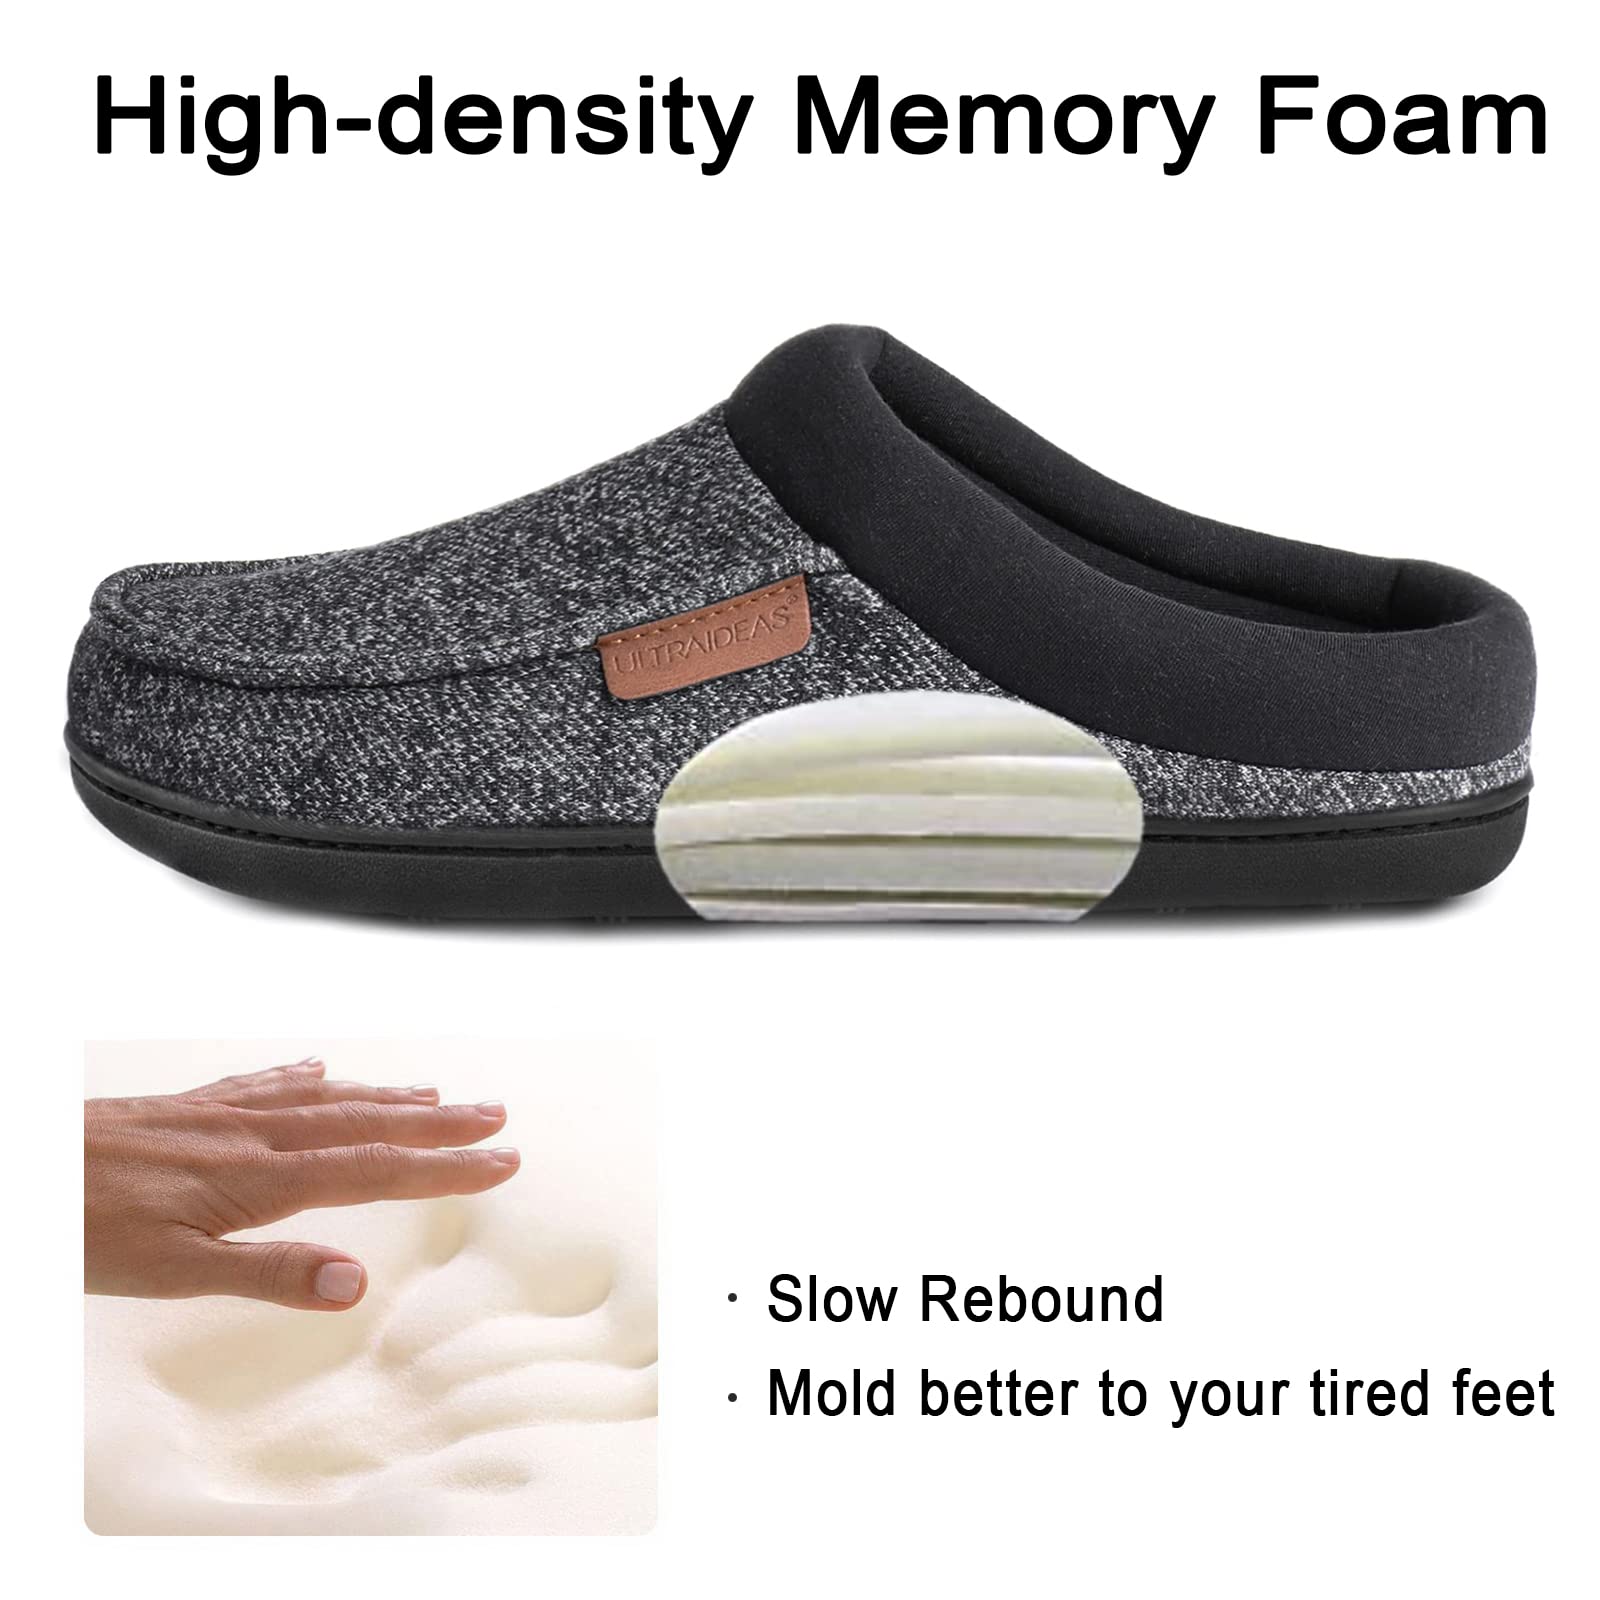 ULTRAIDEAS Men's Moccasin Slippers with Memory Foam Insole, Slip on House Slippers, Warm Faux Sherpa Lining House Shoes Clog with Nonslip Rubber Sole for Indoor & Outdoor